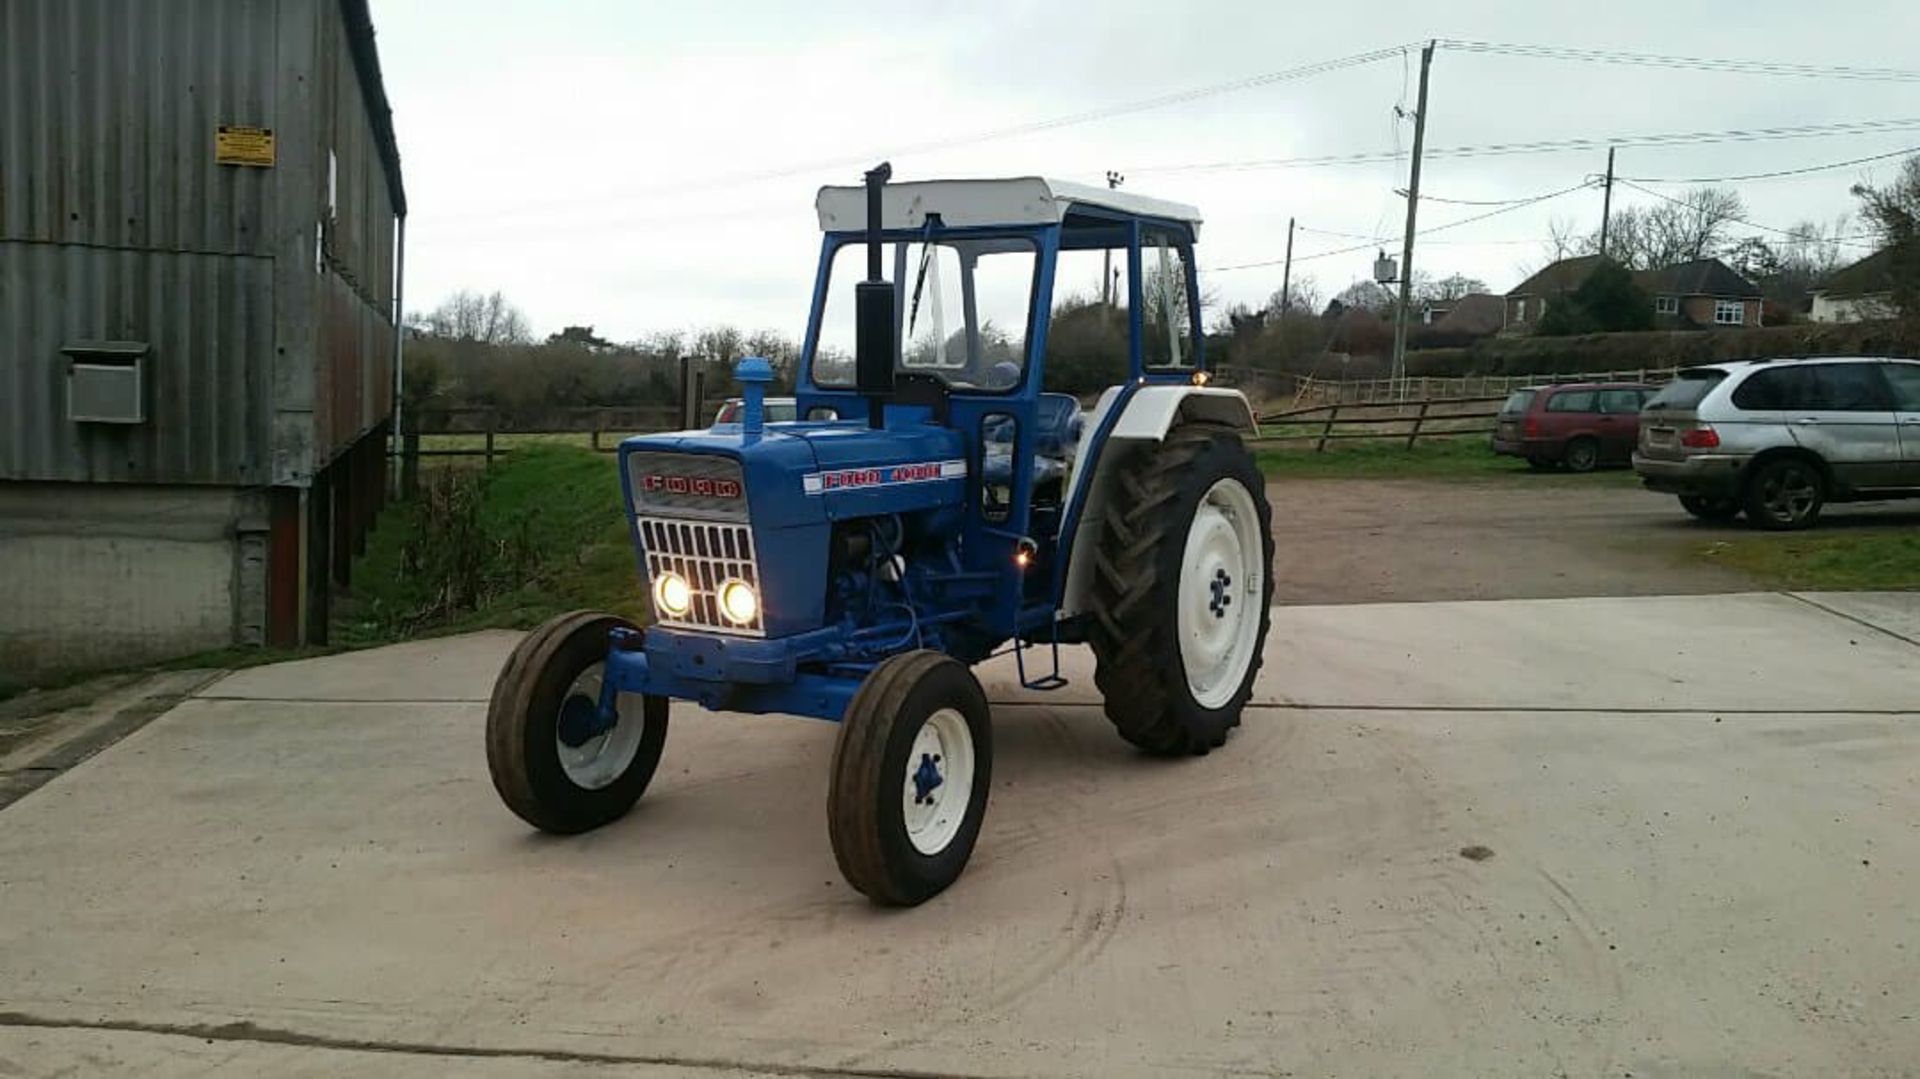 1971 Fully Refurbished Ford 4000 Tractor - Image 2 of 10